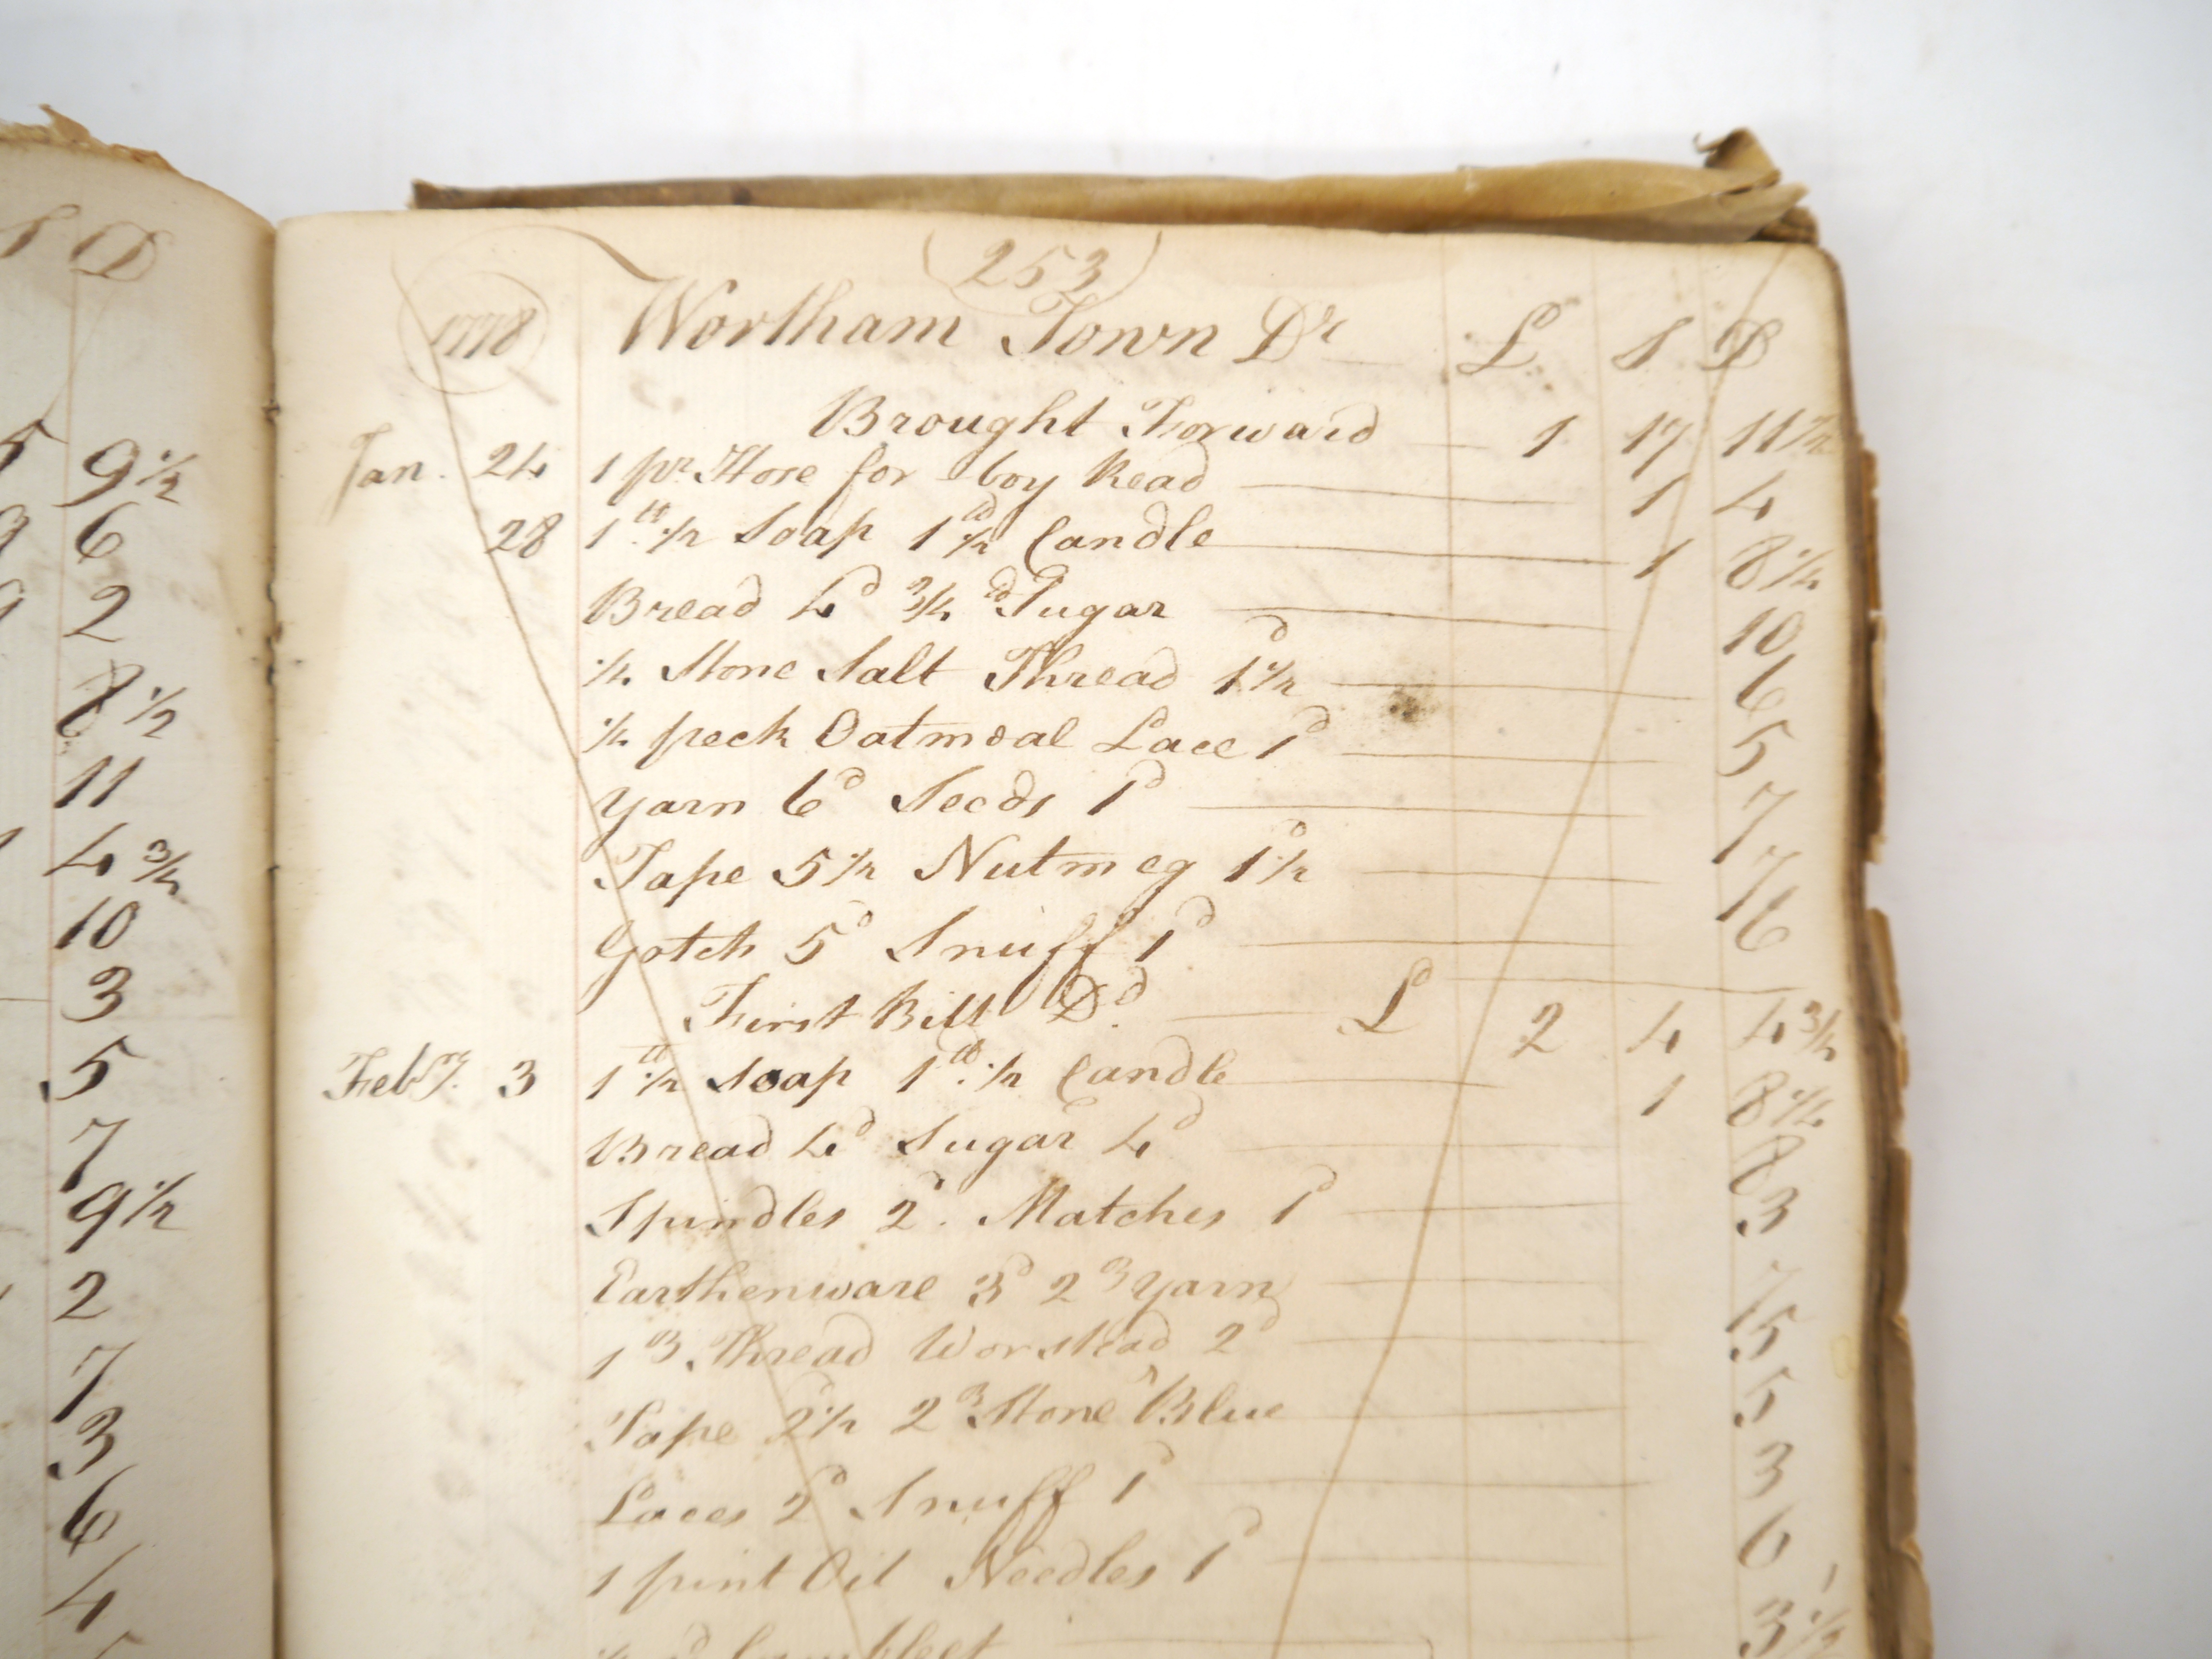 (Suffolk, Wortham.) [Ambrose Wretts.] A large manuscript account book, compiled 1772-1780 in the - Image 10 of 15